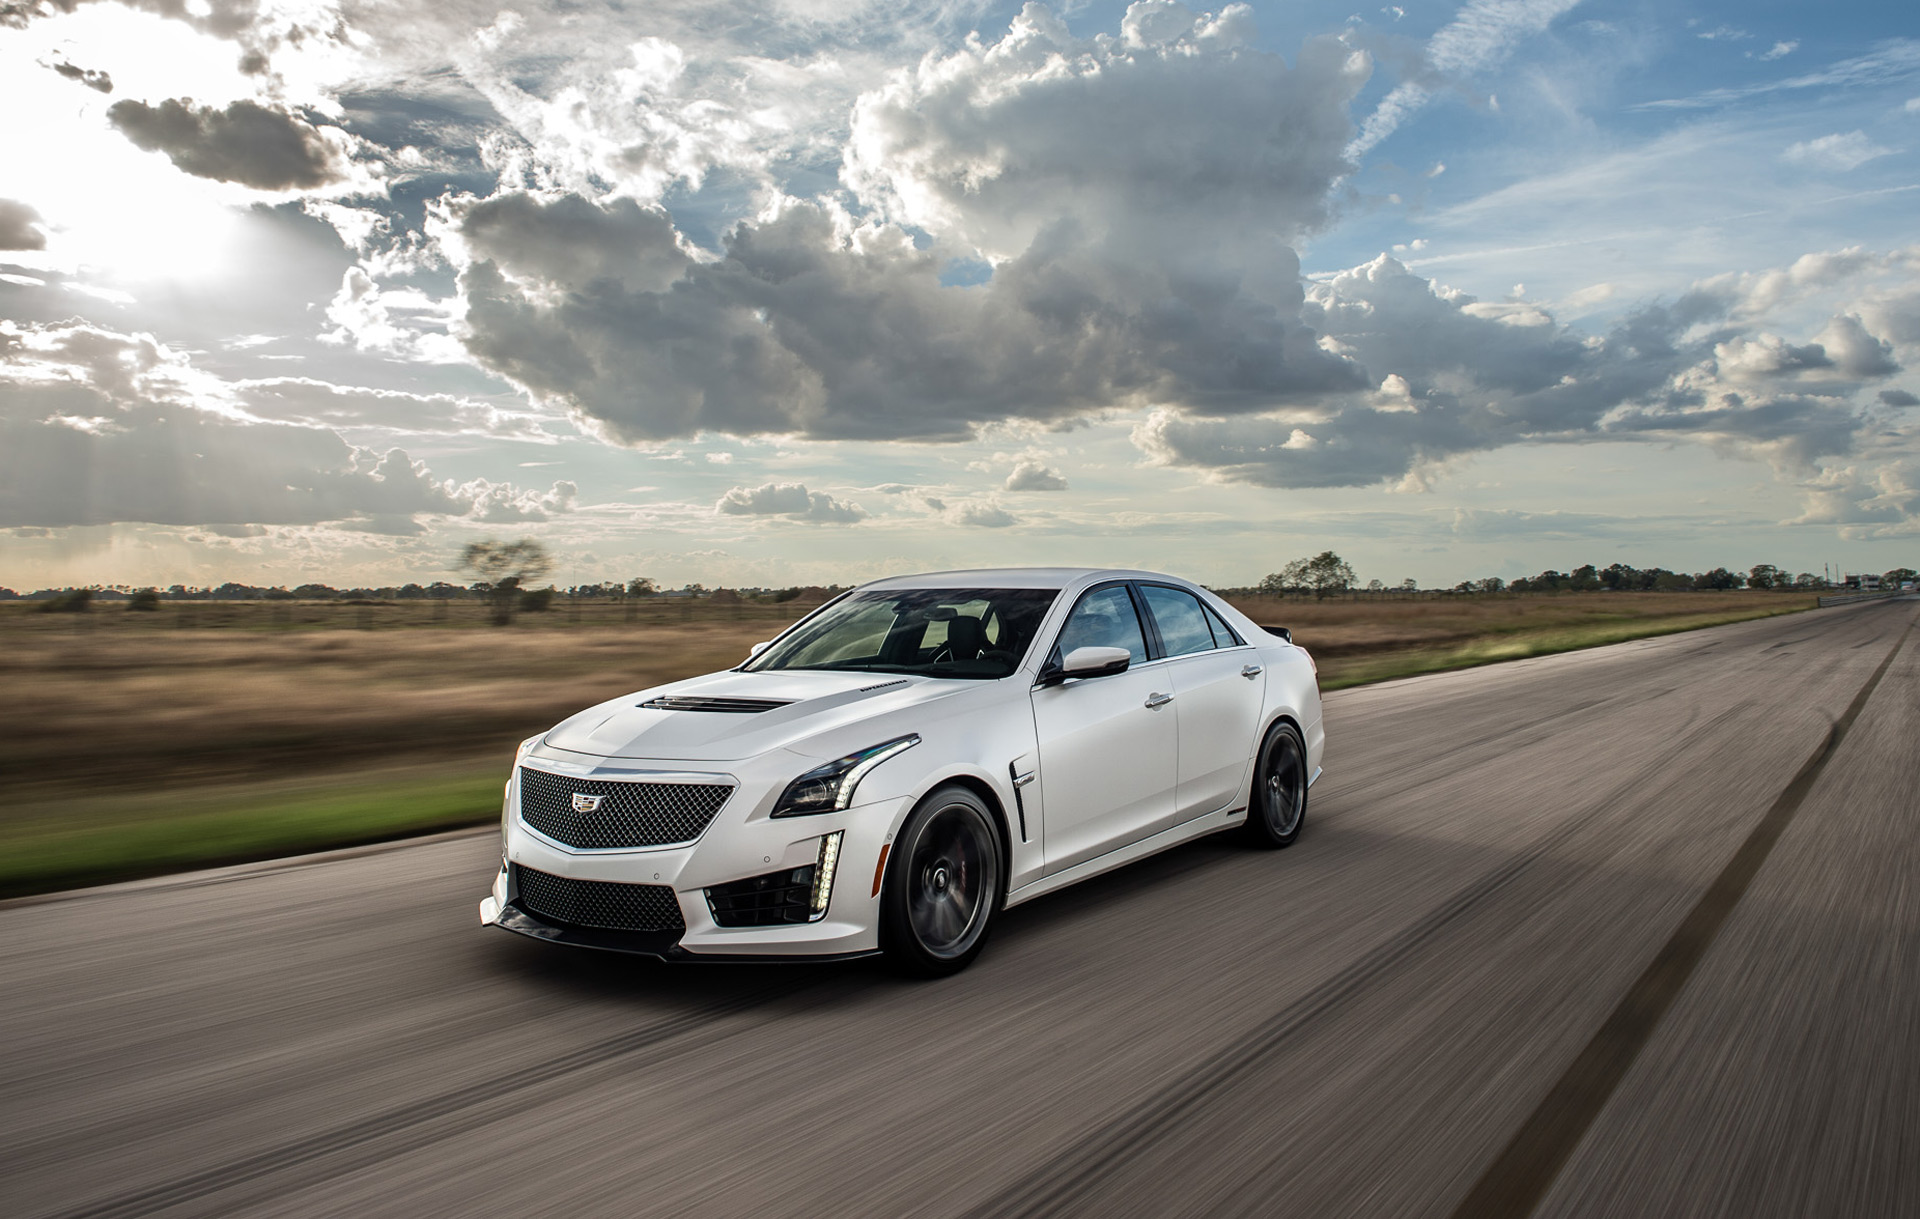 Hennessey S 1 000 Horsepower Cadillac Cts V Hits The Track And Dyno